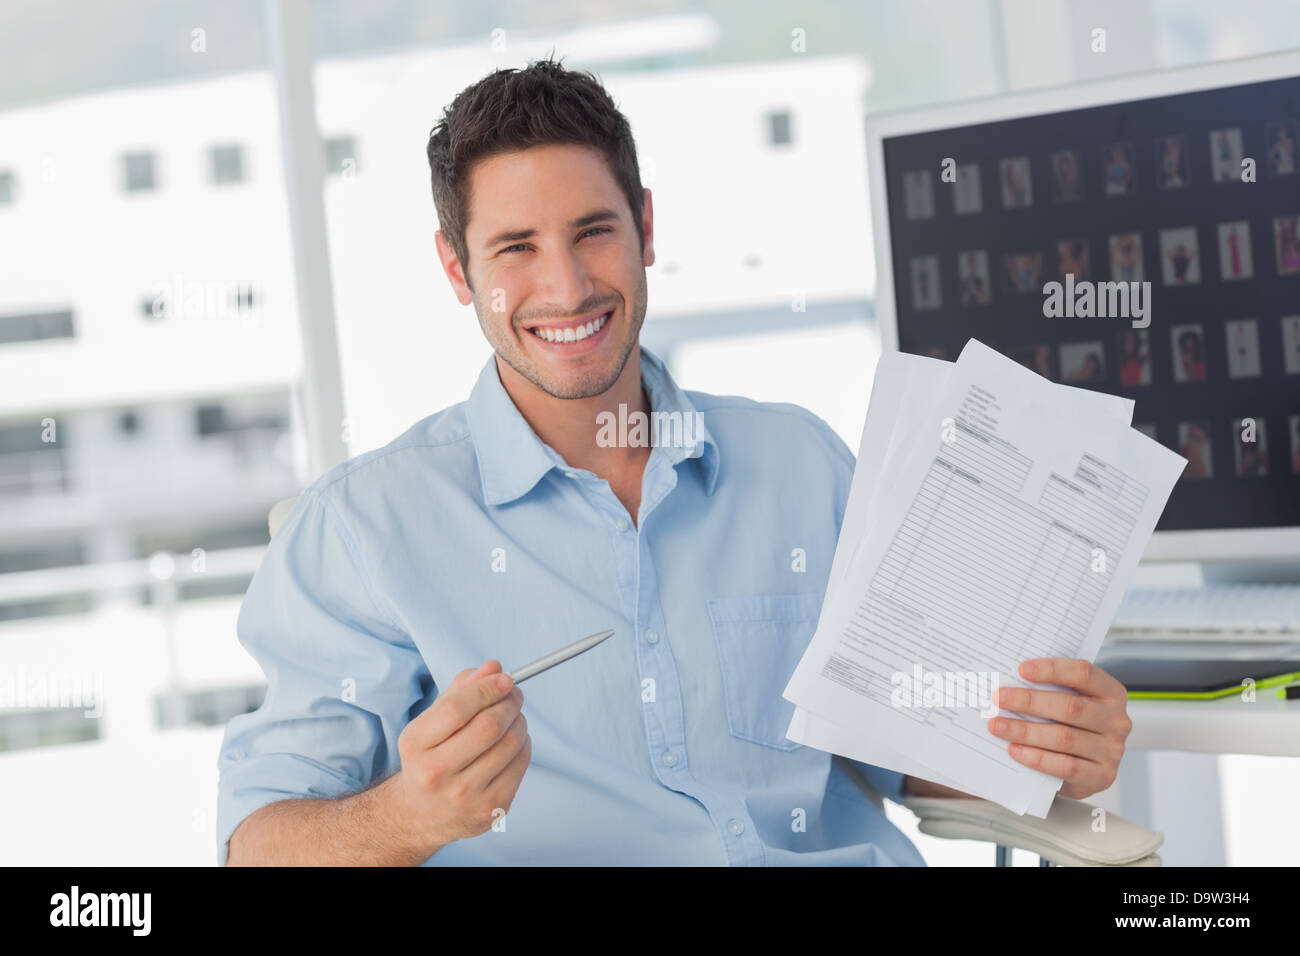 Cheerful photo editor pointing at documents Stock Photo